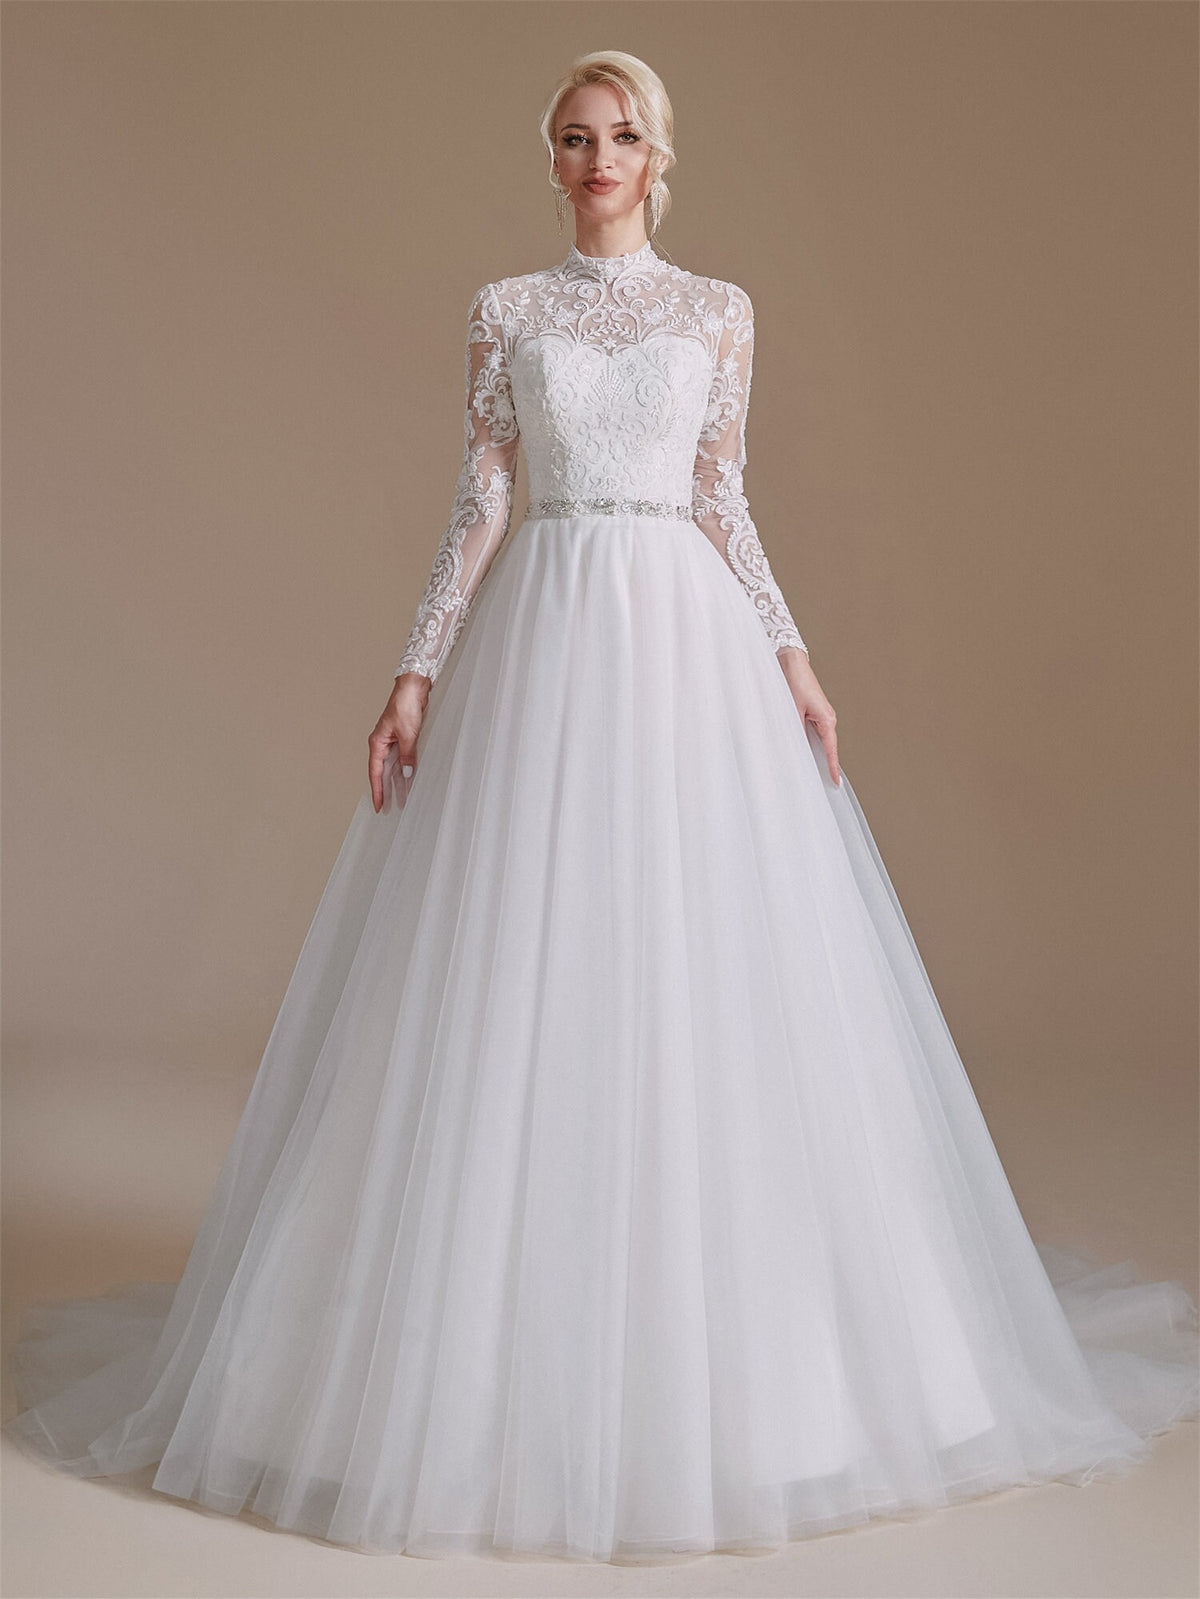 Long Sleeves High Neck Full A-Line Wedding Dress Bridal Gown Vintage Style with Tulle Train Buttons